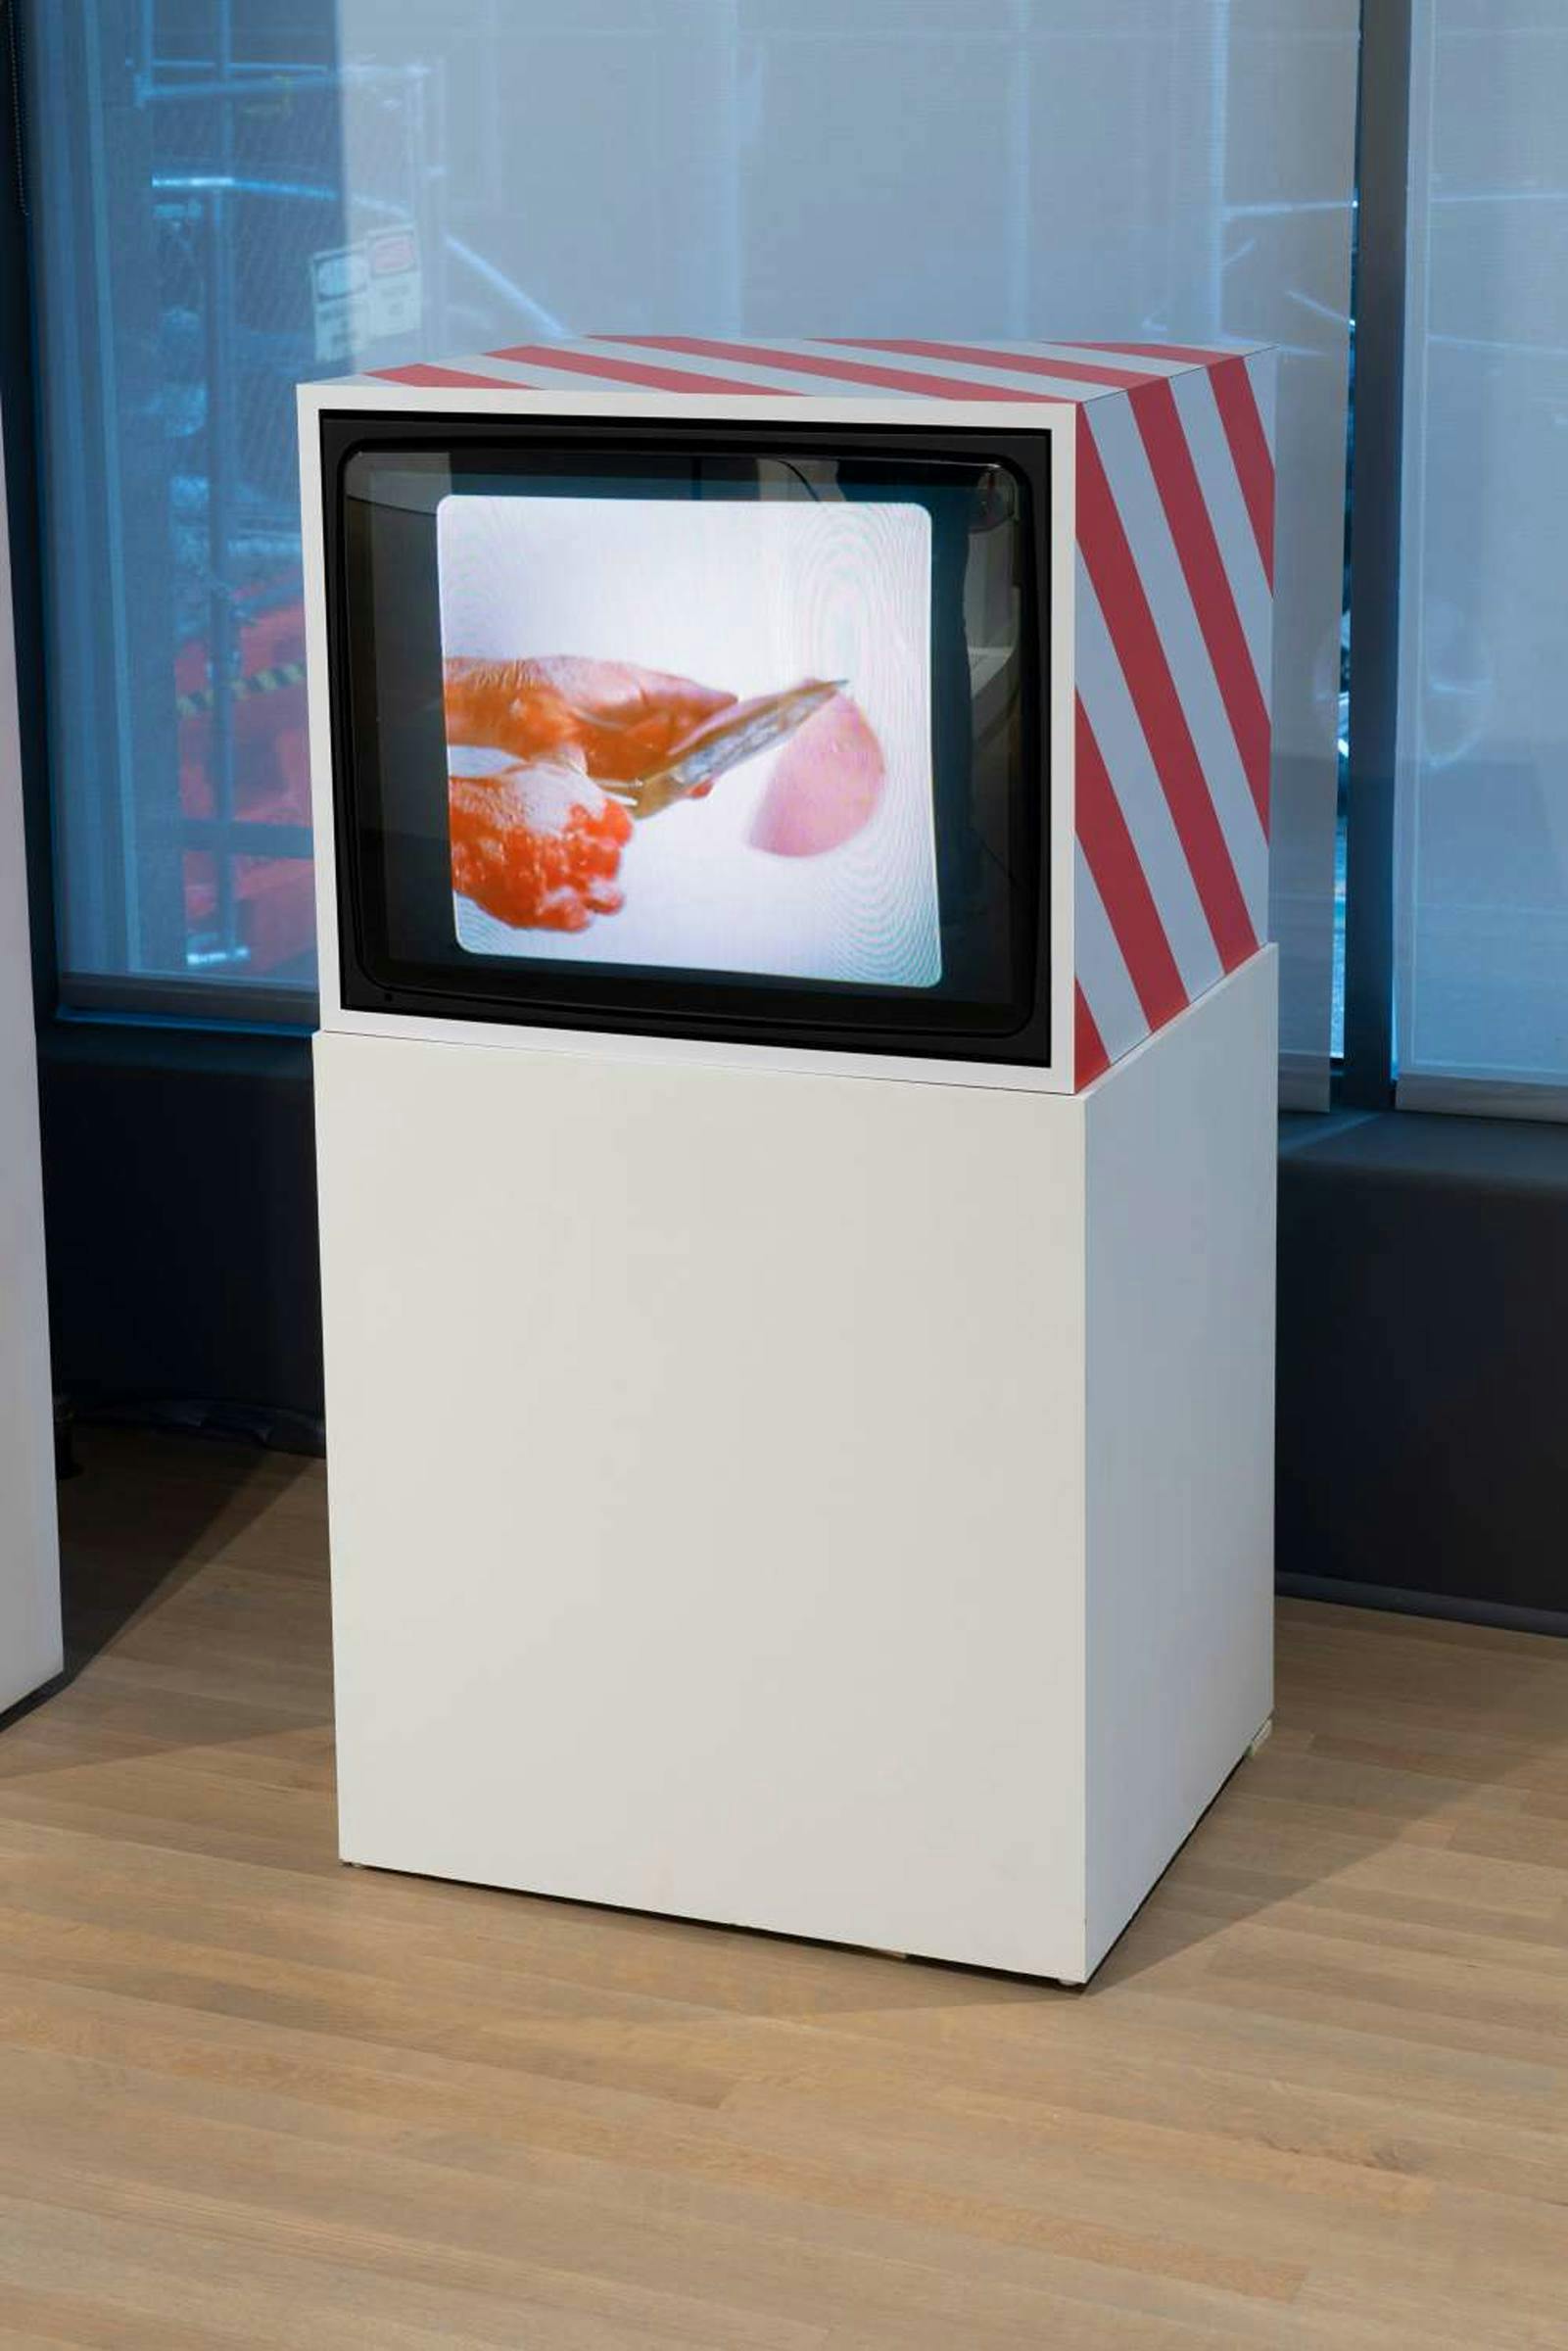 White painted TV stand with red stripes stands in a gallery space. Image of hands cutting through ham on the screen.